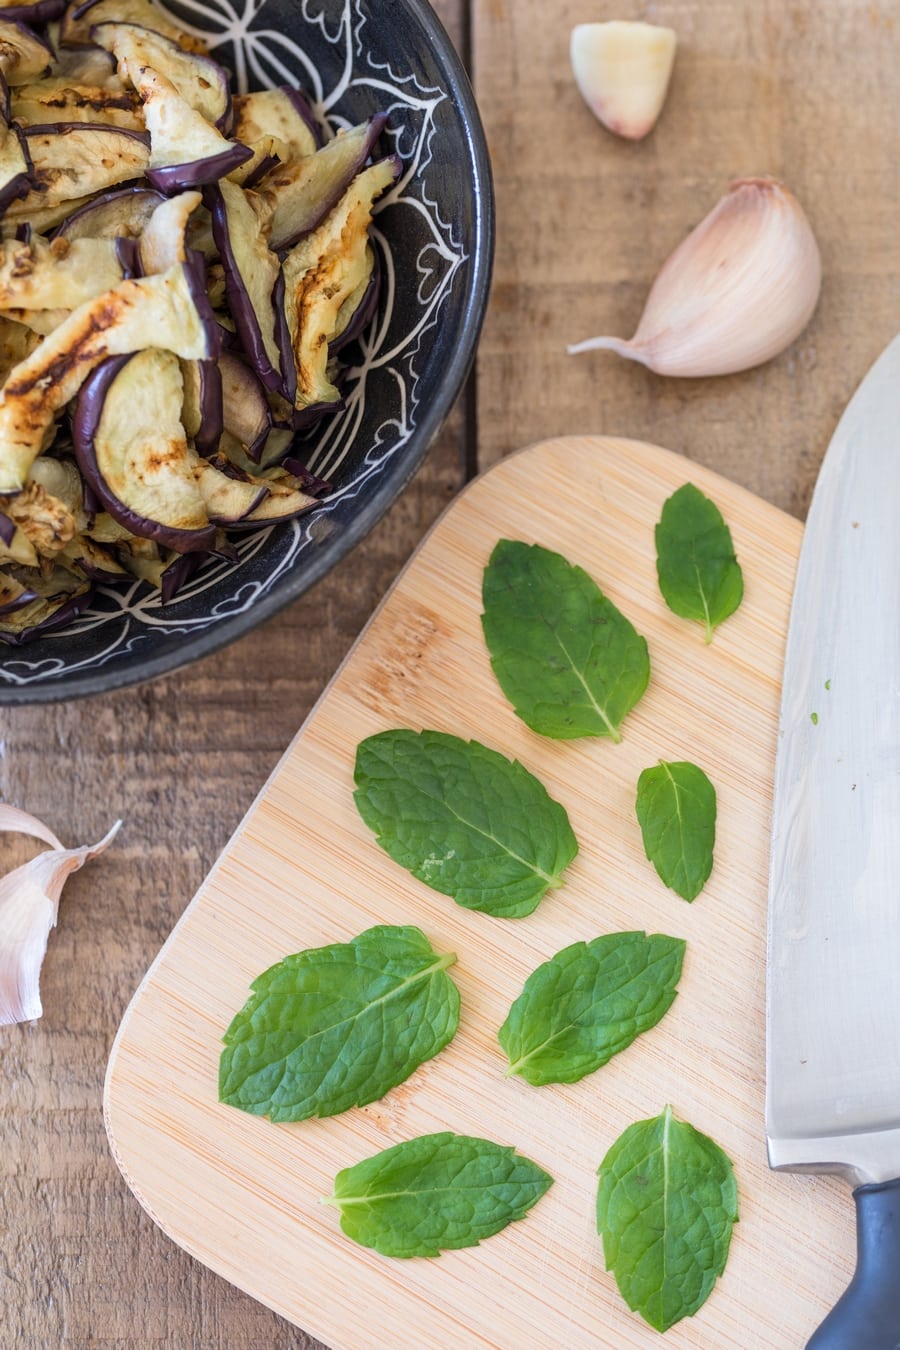 Fresh spearmint leaves on a cutting board, sliced grilled eggplant on the side.